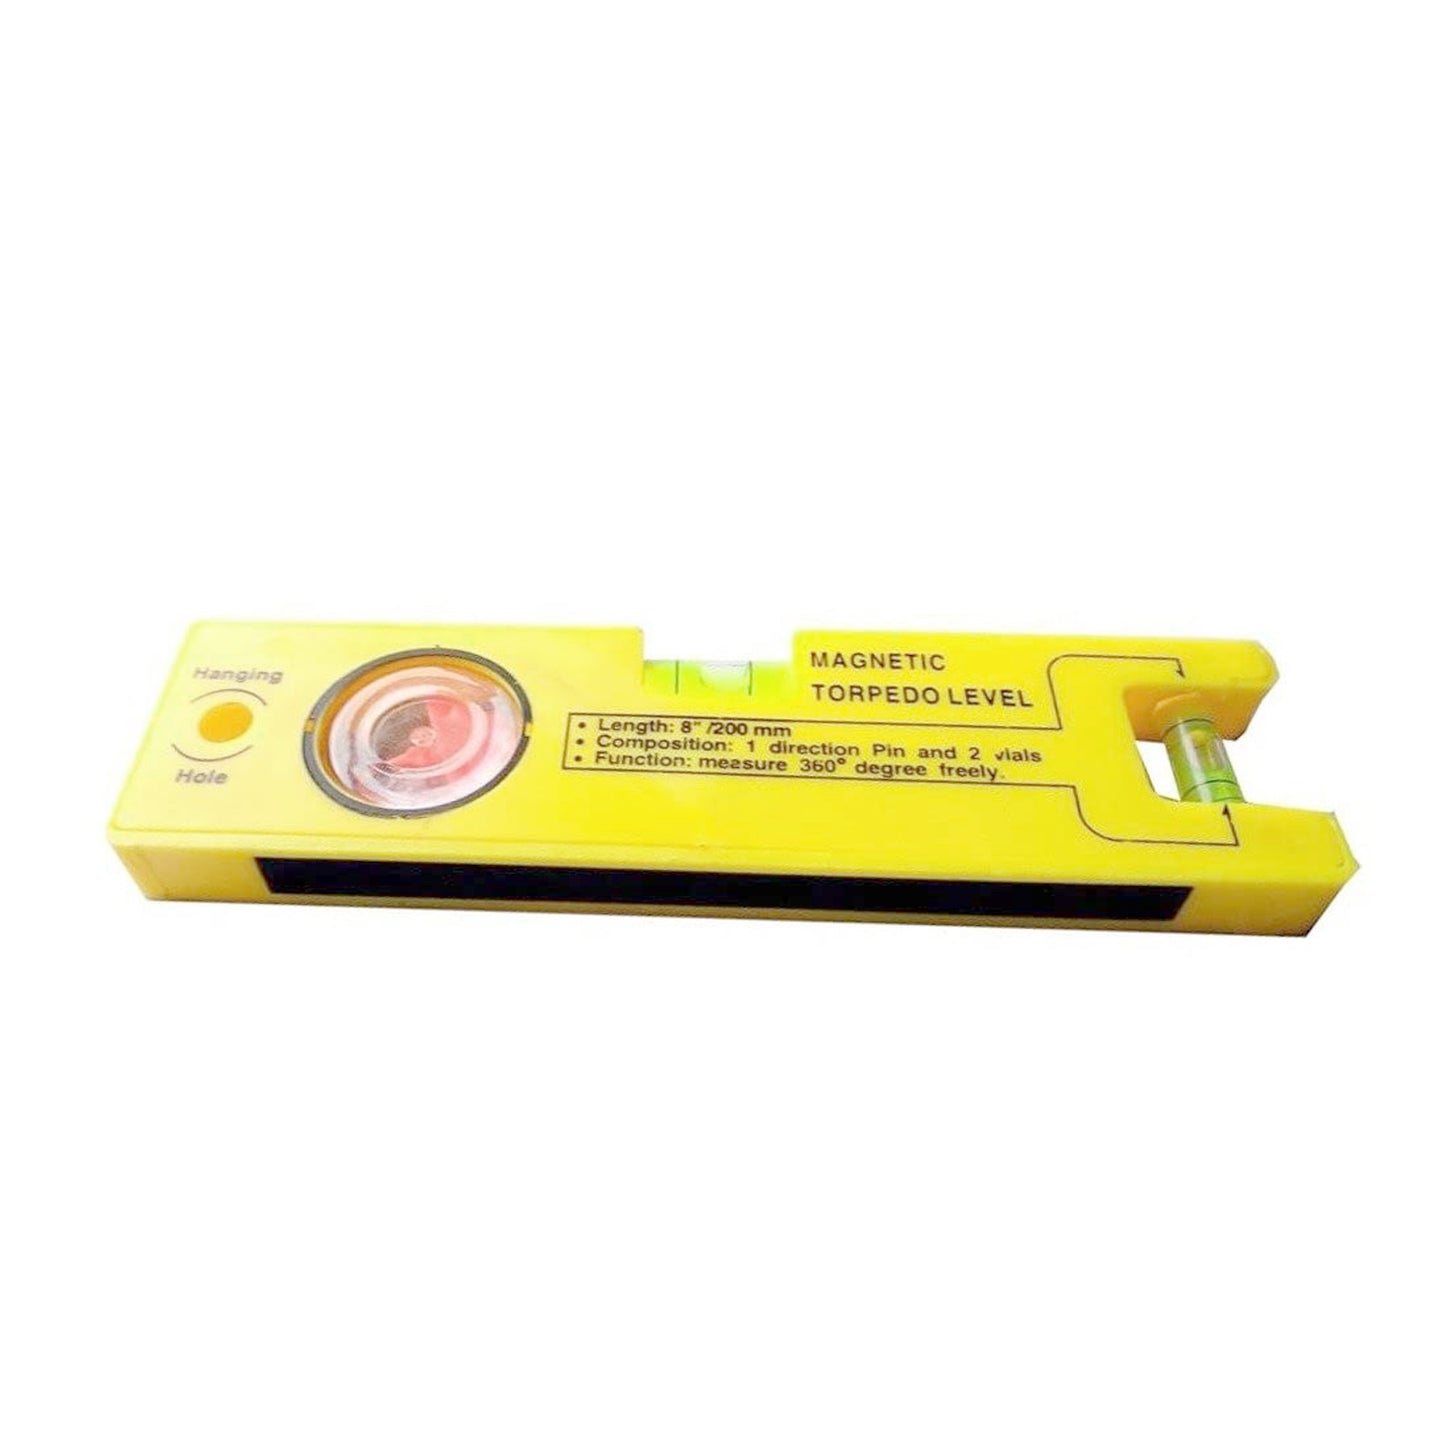 8-Inch Magnetic Torpedo Level with 1 Direction Pin | 2 Vials and 360 Degree View